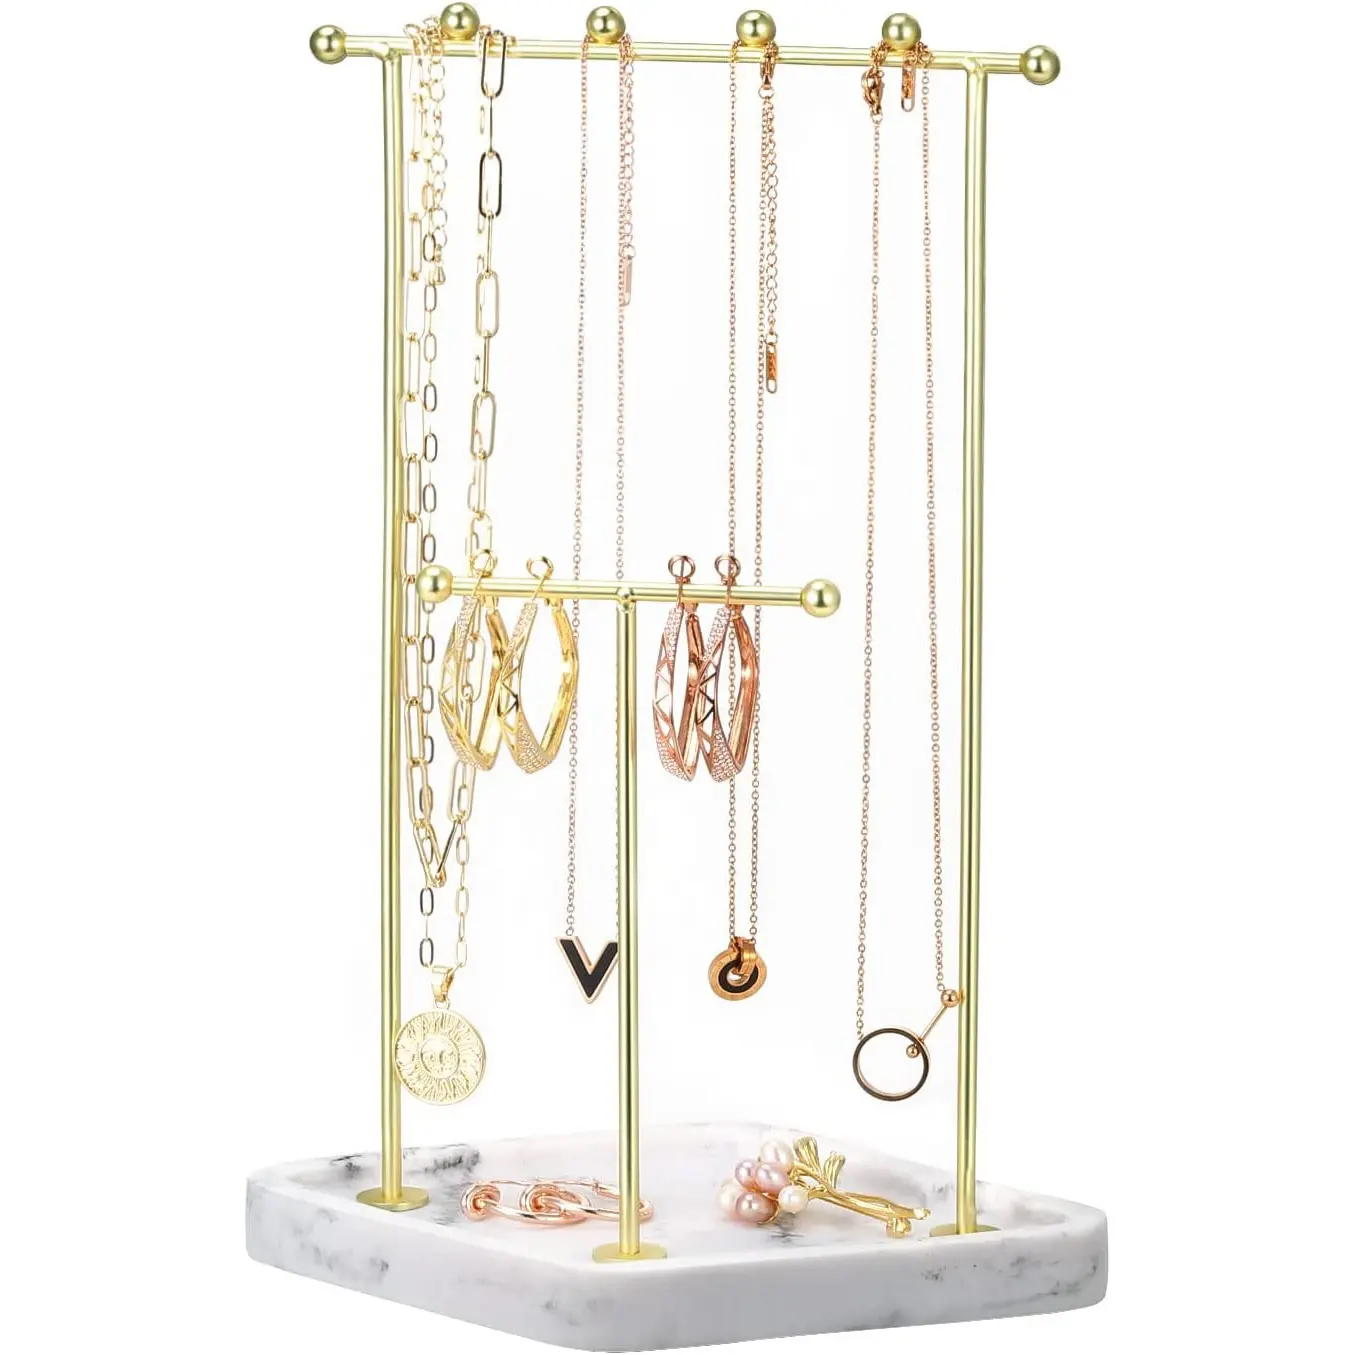 Resin Ring Tray Base Portable Jewelry Stand Gold Metal Rack 2 Tier Bracelet Necklace Hanging Organizer Display Necklace Holder